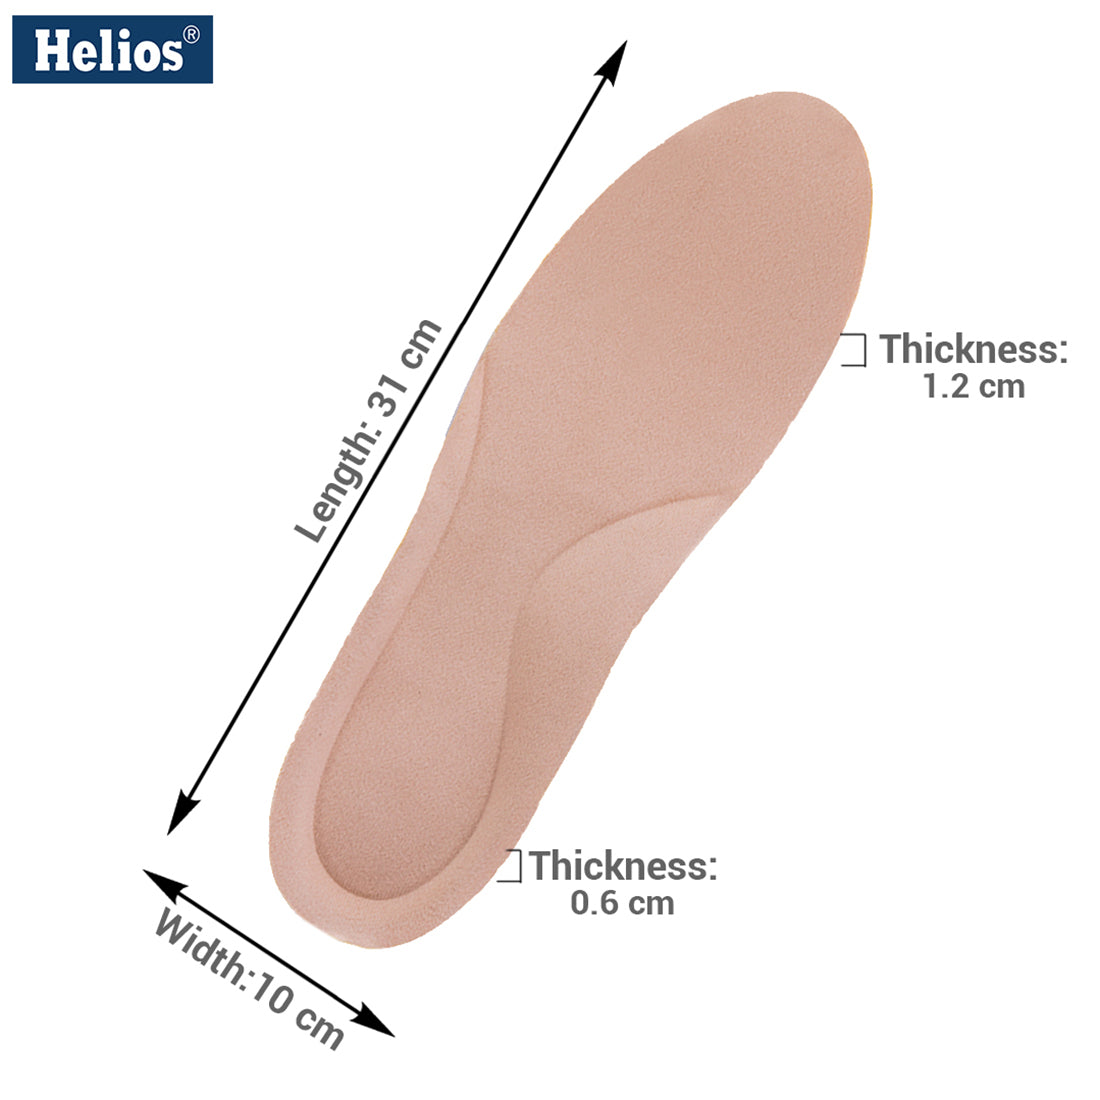 Helios Ultra sport insole with arch support  {7-11 size}